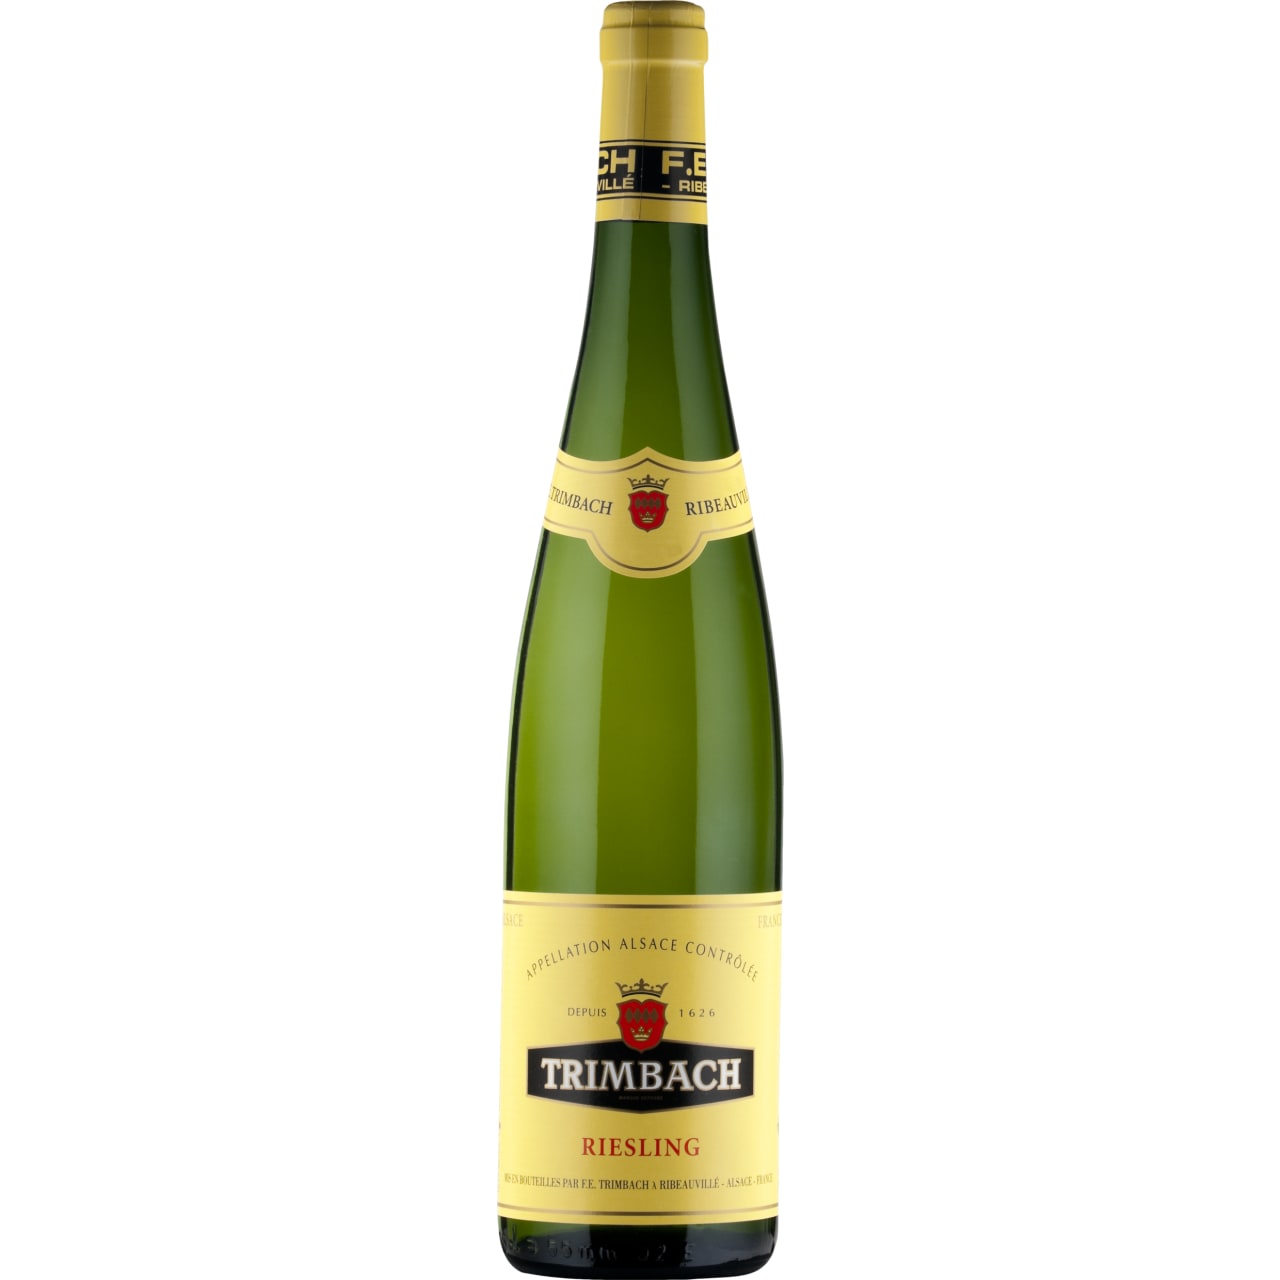 This is absolutely classic dry Riesling with tangy lime pith and aromatic beeswax character. Trimbach makes "the finest dry Riesling in the world," according to Jancis Robinson MW.